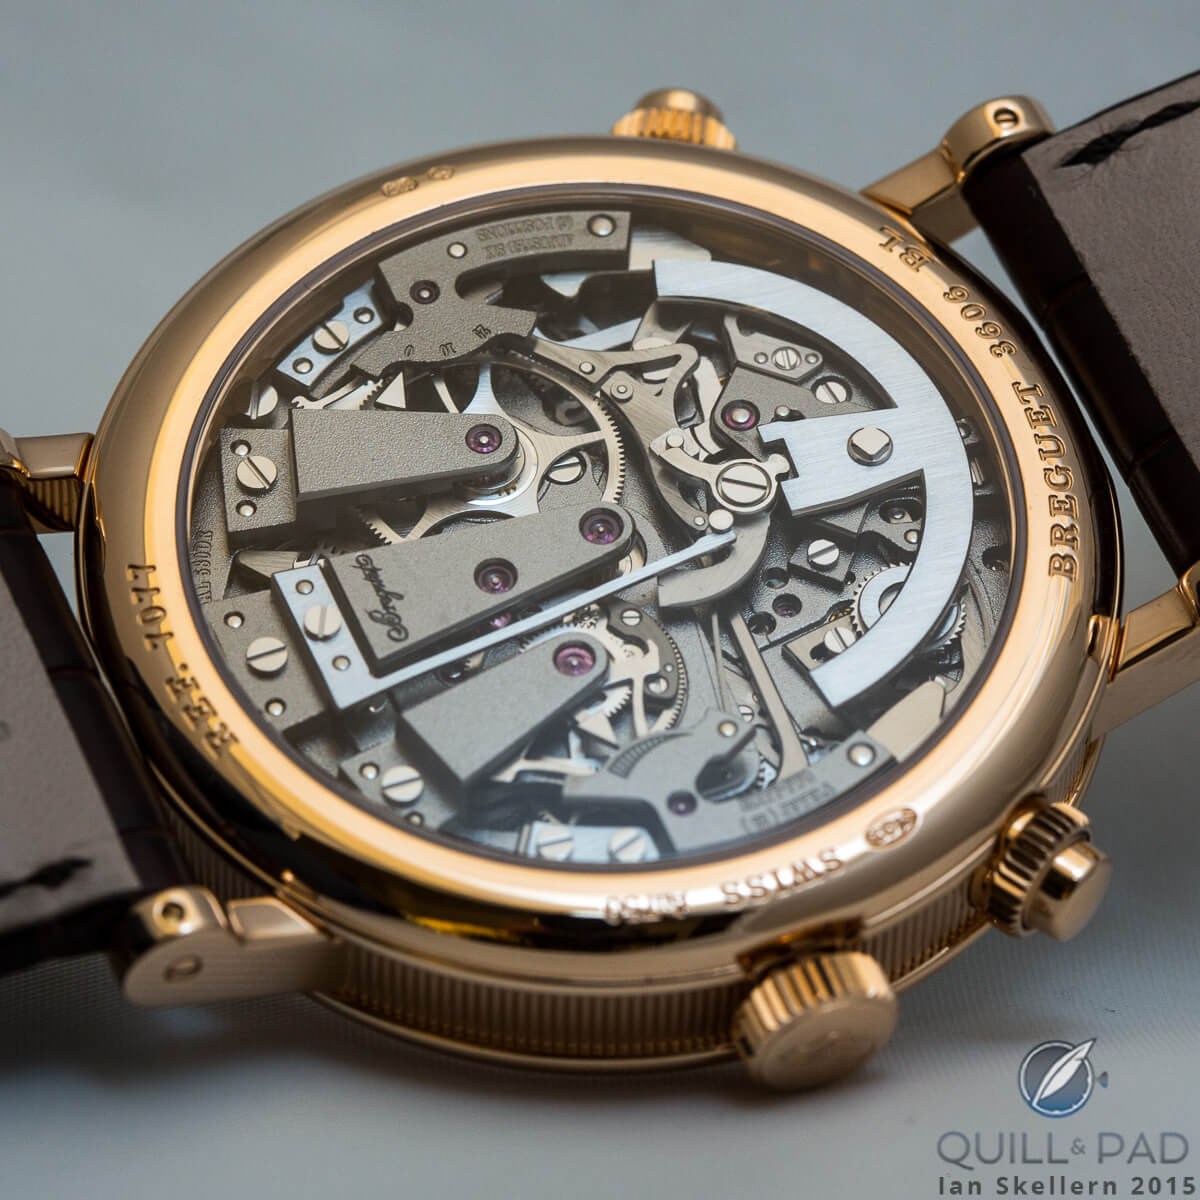 View of the back of the Breguet 7077 La Tradition Independent Chronograph